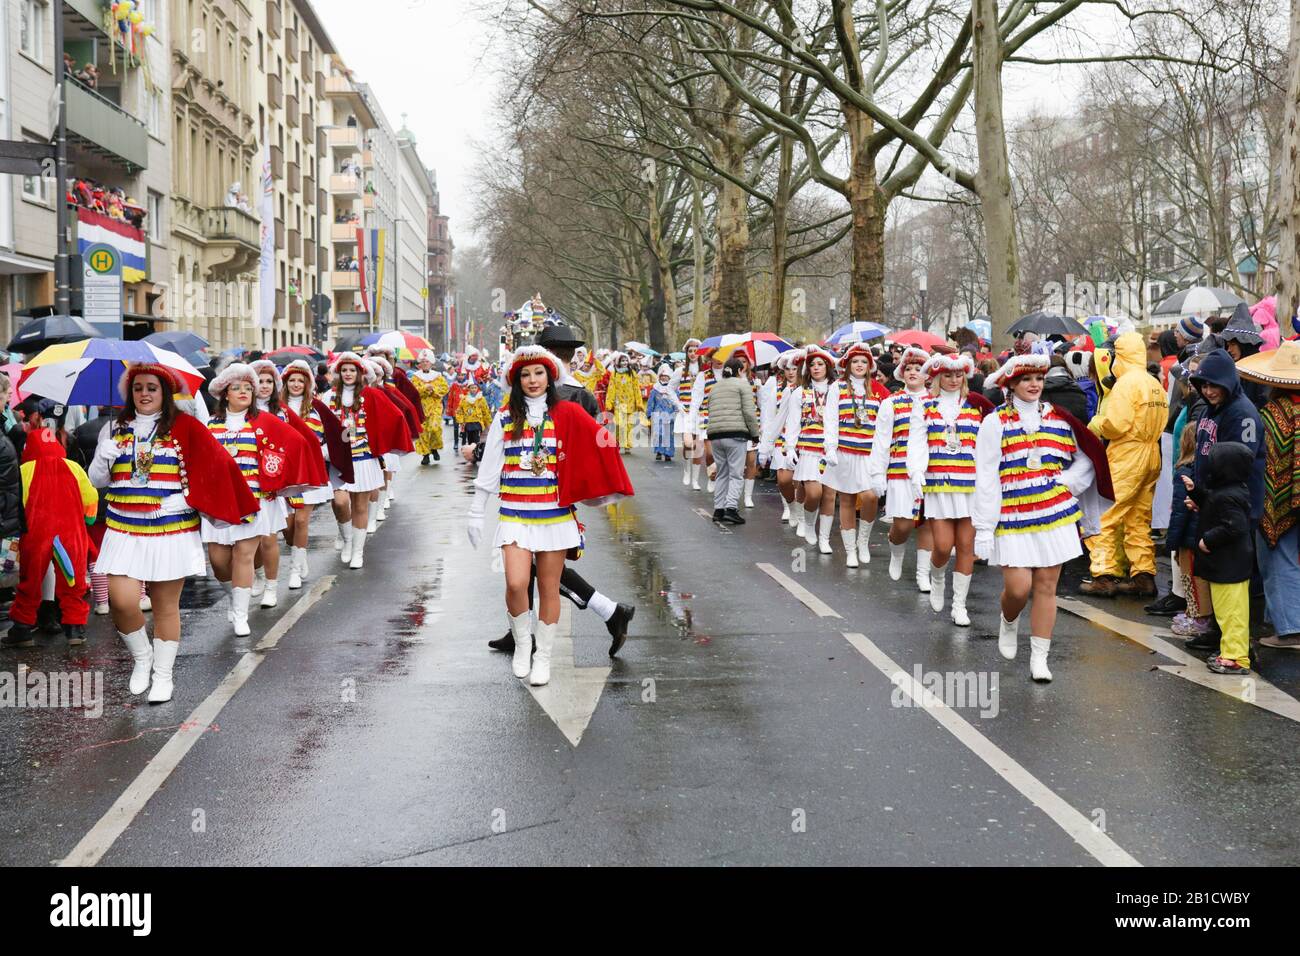 Mainz, Germany. 24th February 2020. Members of the Mainzer Kleppergarde take part in the Mainz Rose Monday parade. Around half a million people lined the streets of Mainz for the traditional Rose Monday Carnival Parade. The 9 km long parade with over 9,000 participants is one of the three large Rose Monday Parades in Germany. Stock Photo